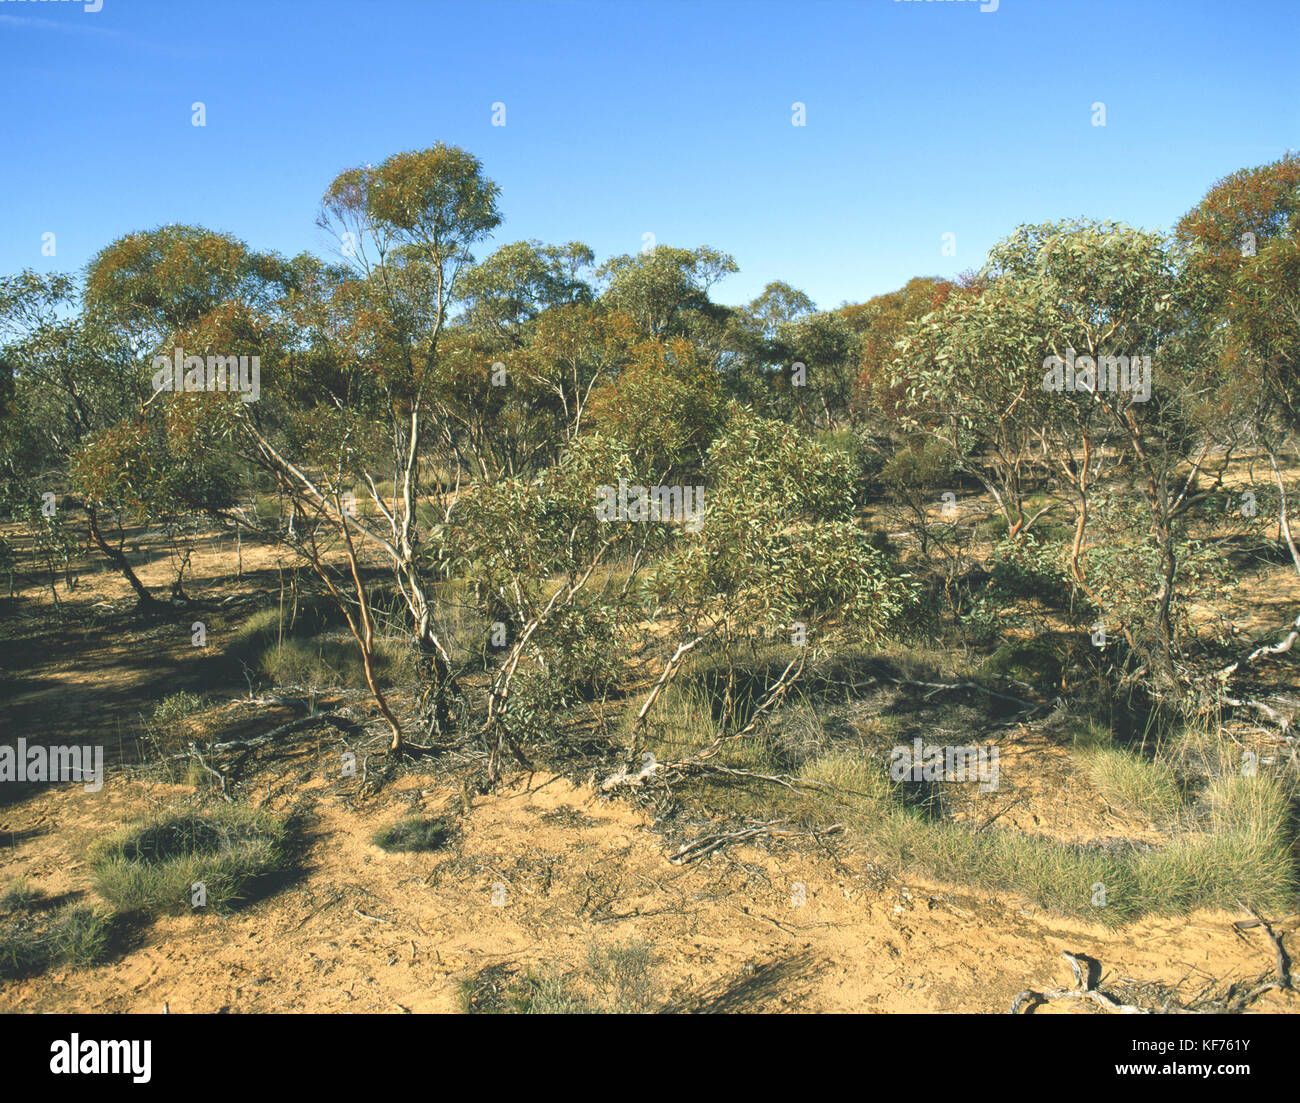 Sand dune mallee, with Narrow-leaved red mallee (Eucalyptus leptophylla) and Red mallee (Eucalyptus socialis). Hattah-Kulkyne National Park, Victoria, Stock Photo